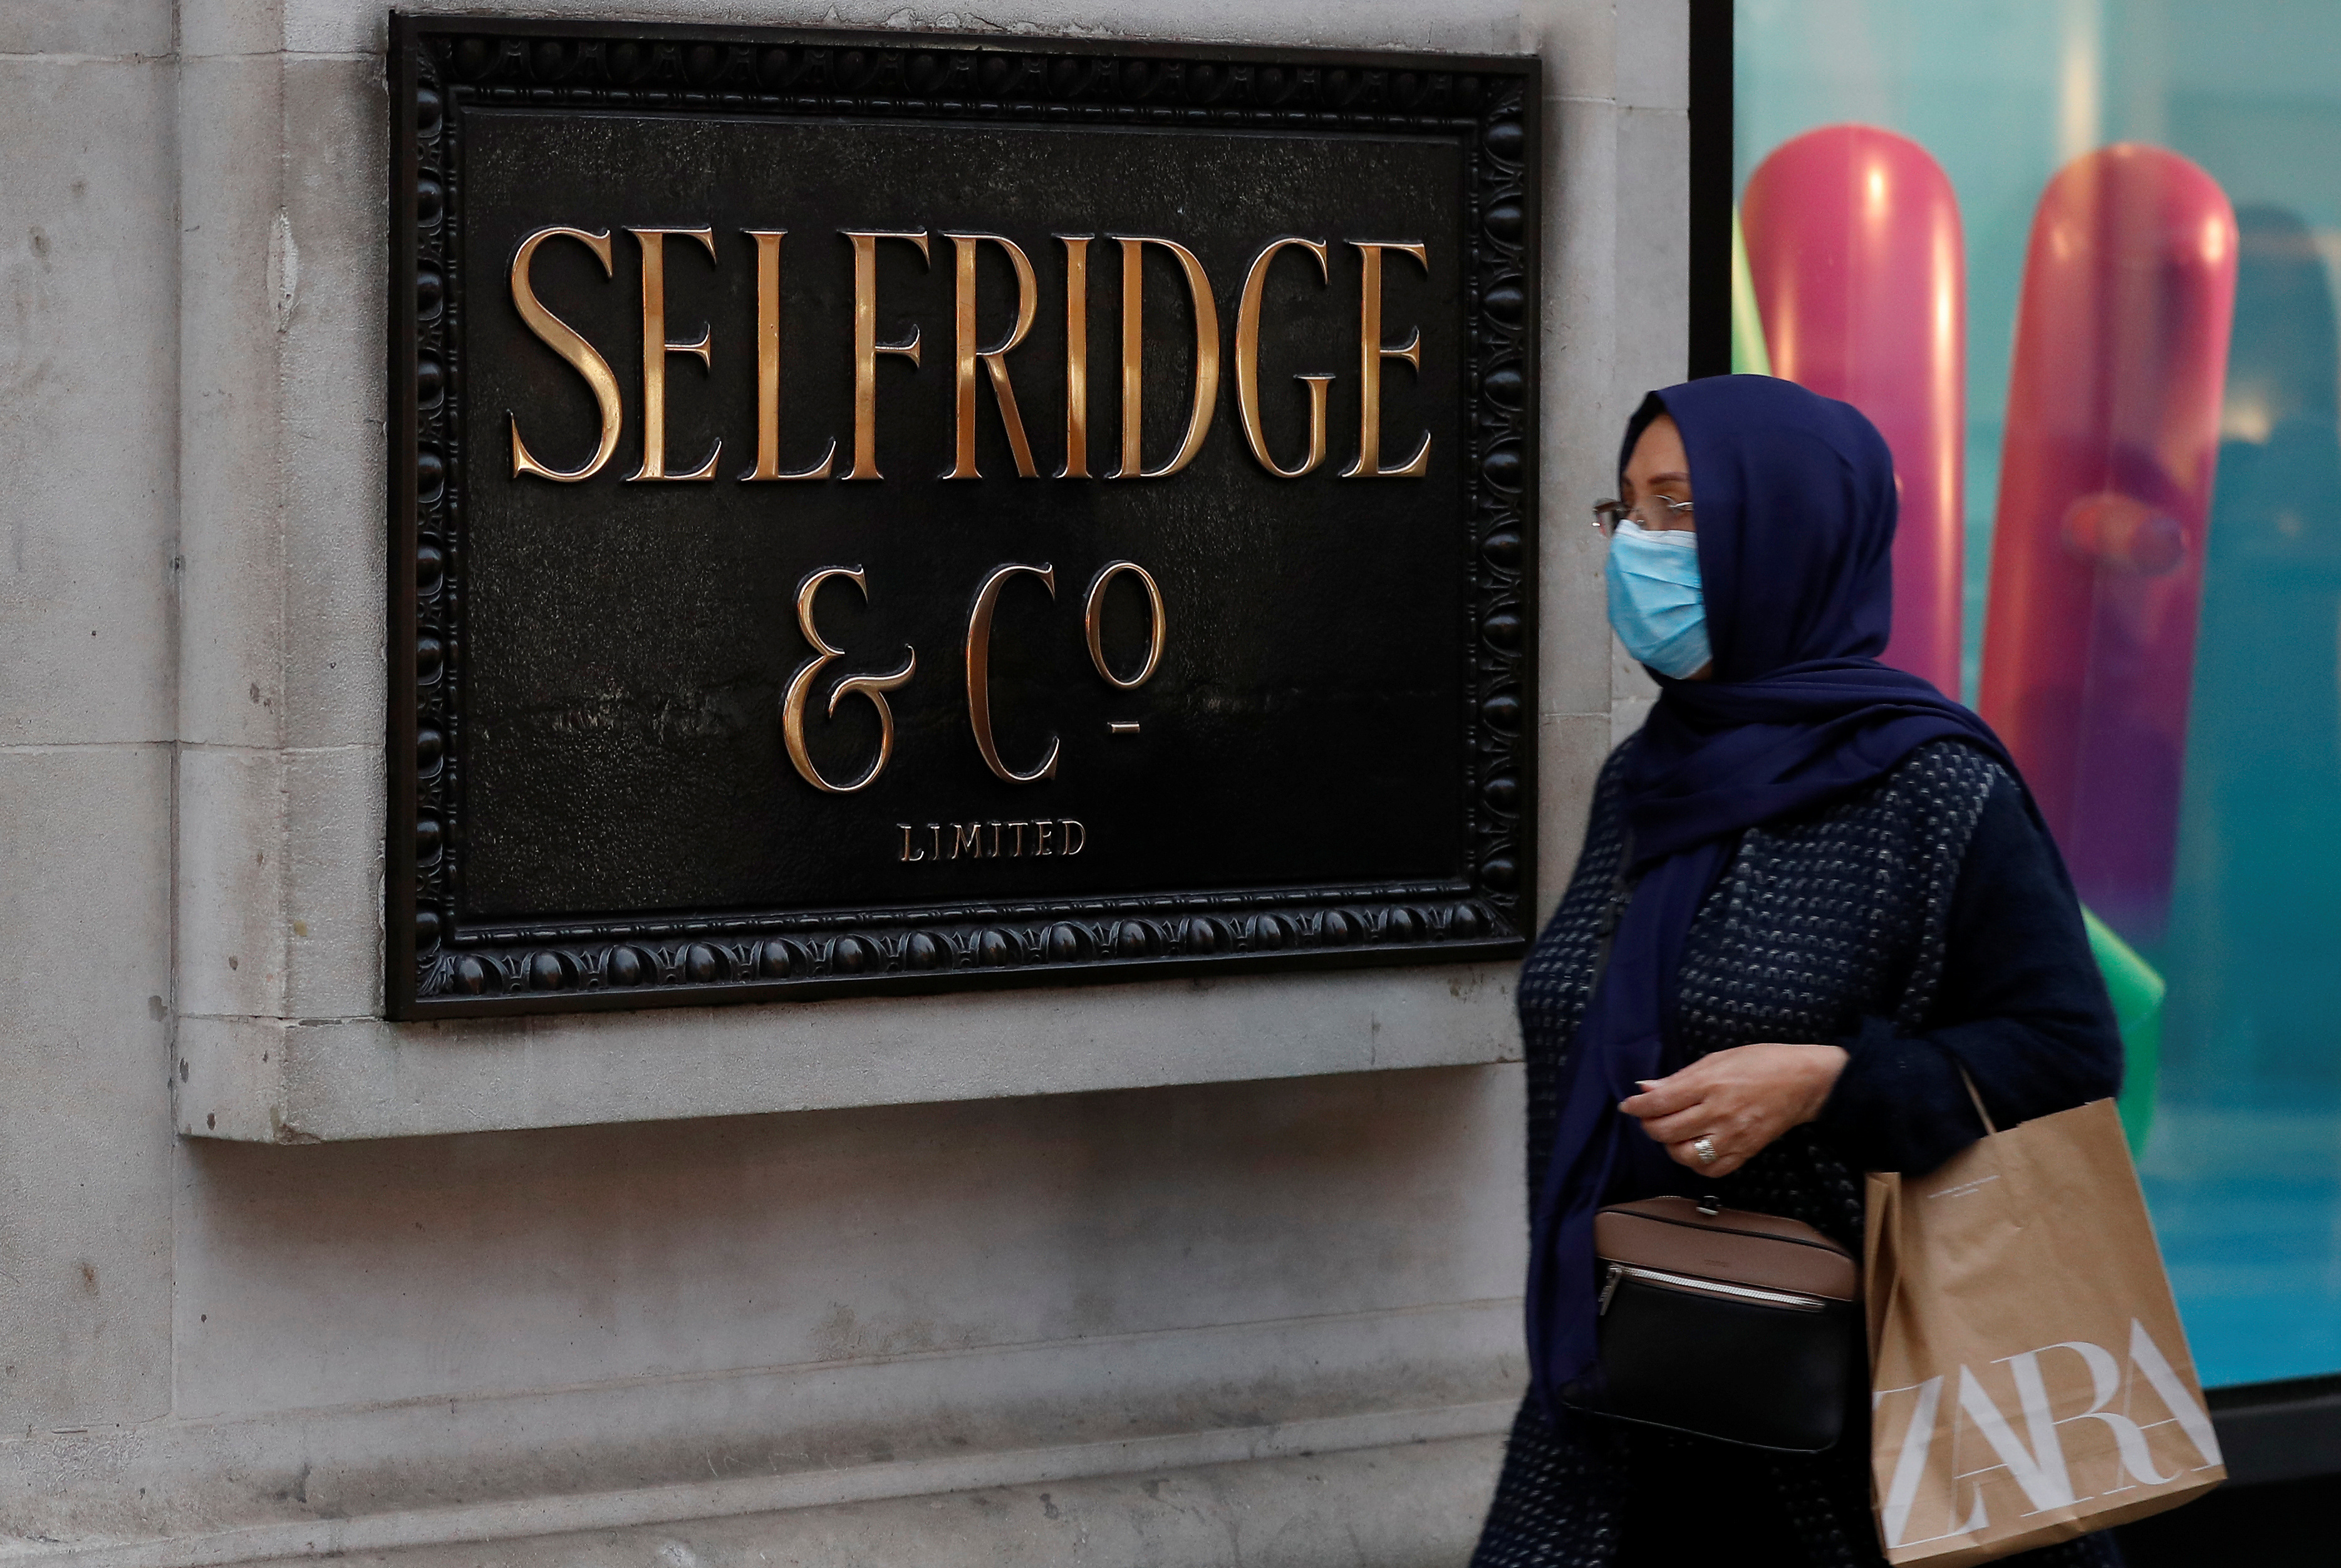 A woman wearing a face mask walks past the Selfridges Oxford street store prior to the company's temporary closure of its UK branches, in London